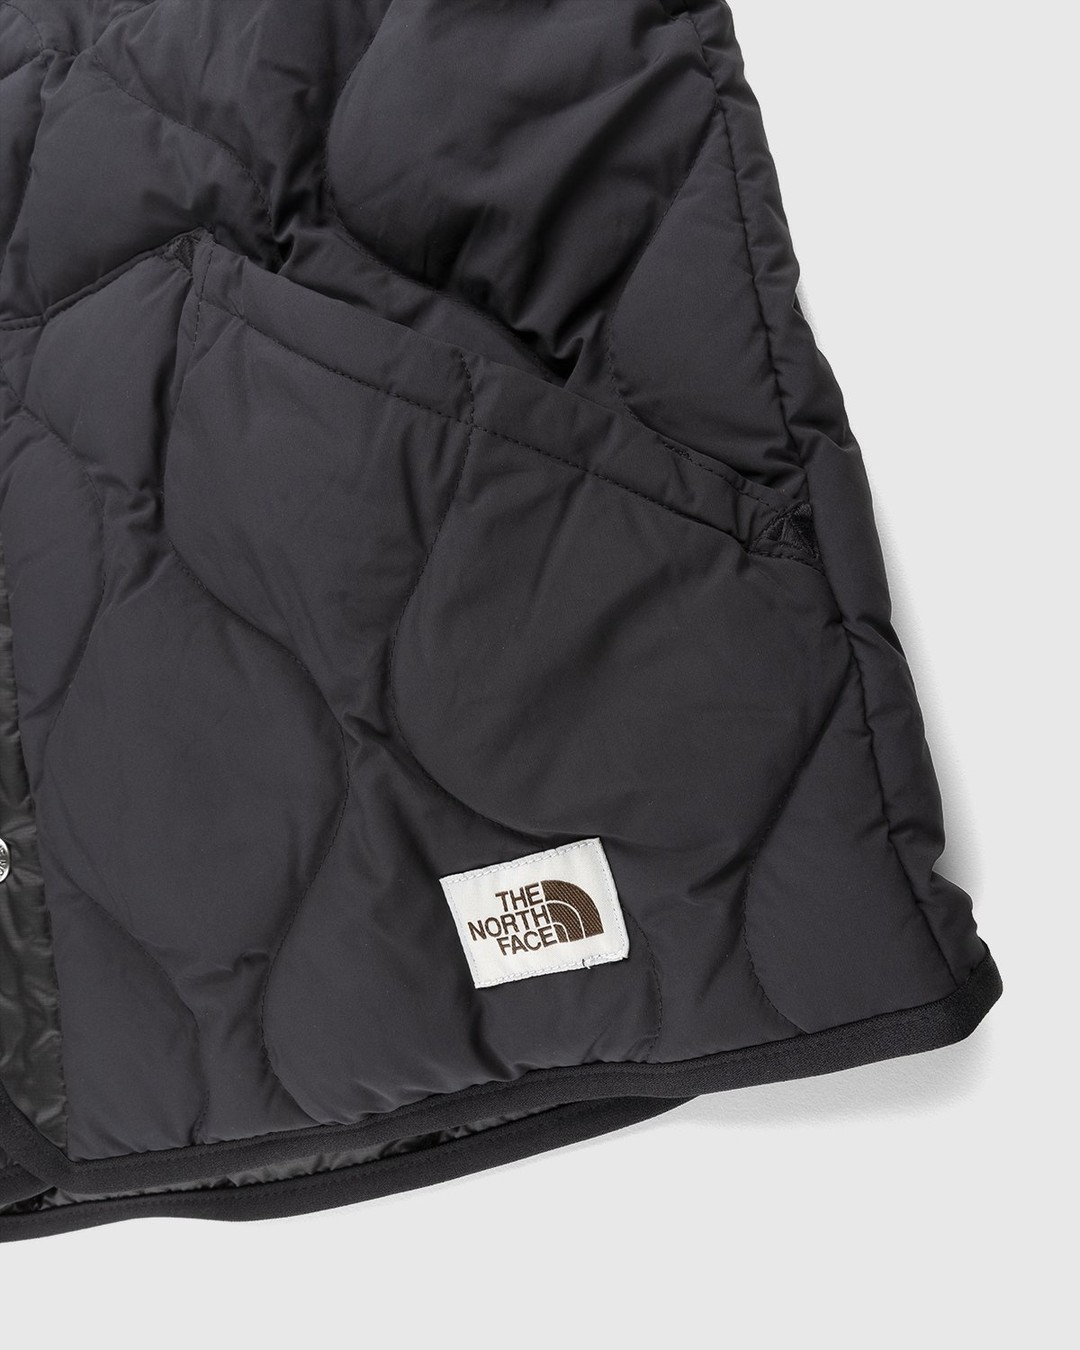 The North Face – M66 Down Jacket Black - Down Jackets - Black - Image 4